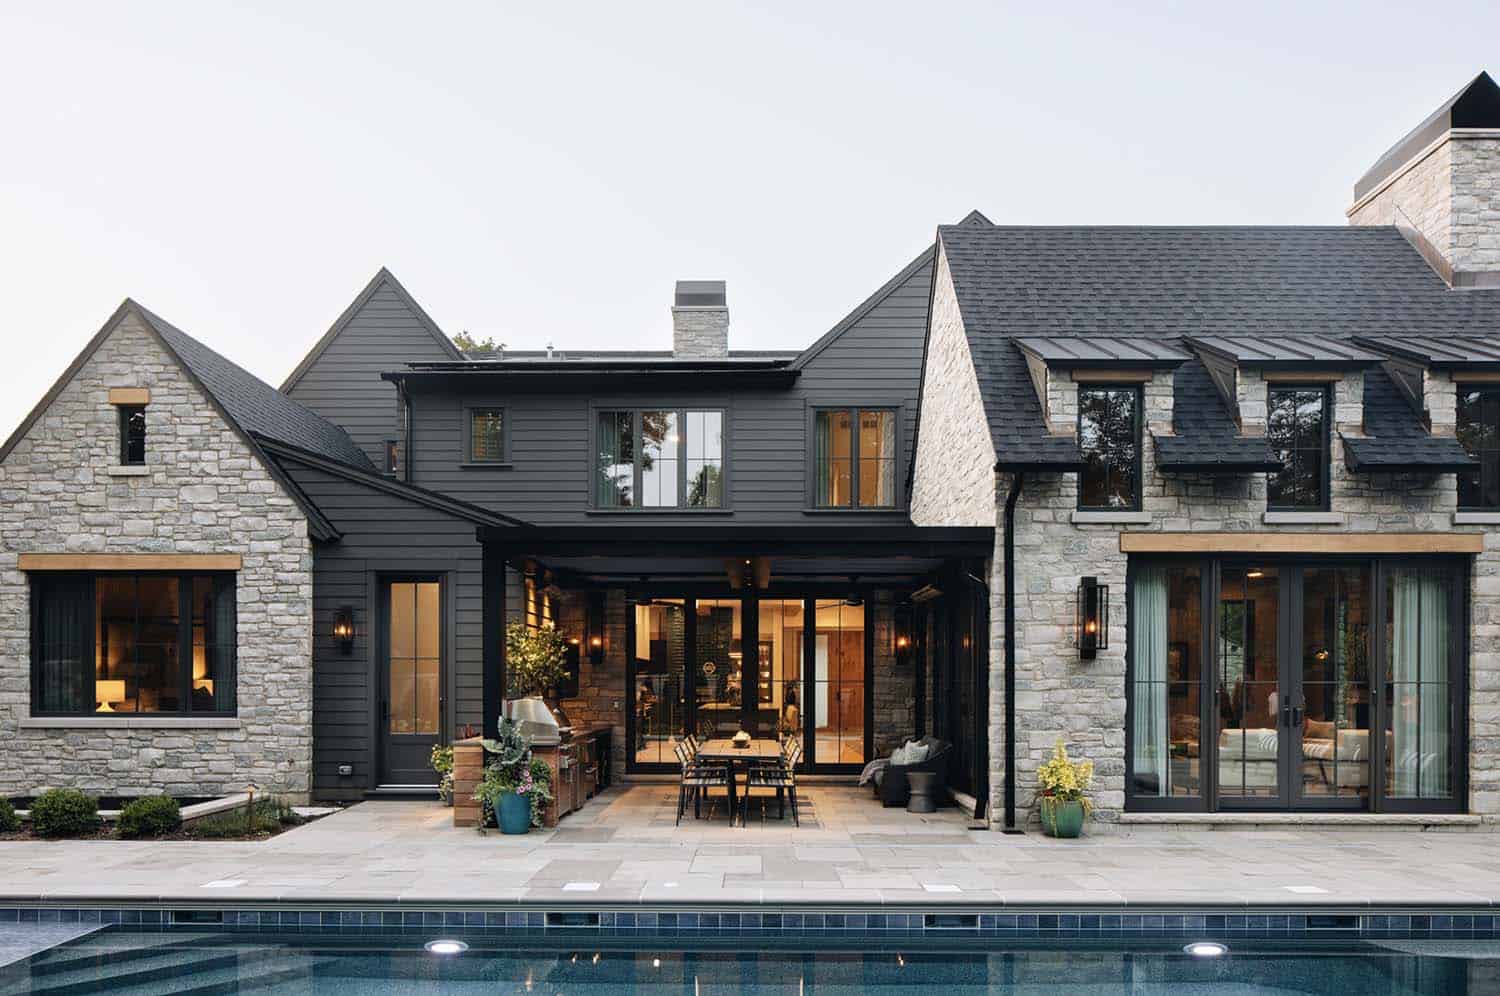 This beyond spectacular house in Chicago has drool-worthy details